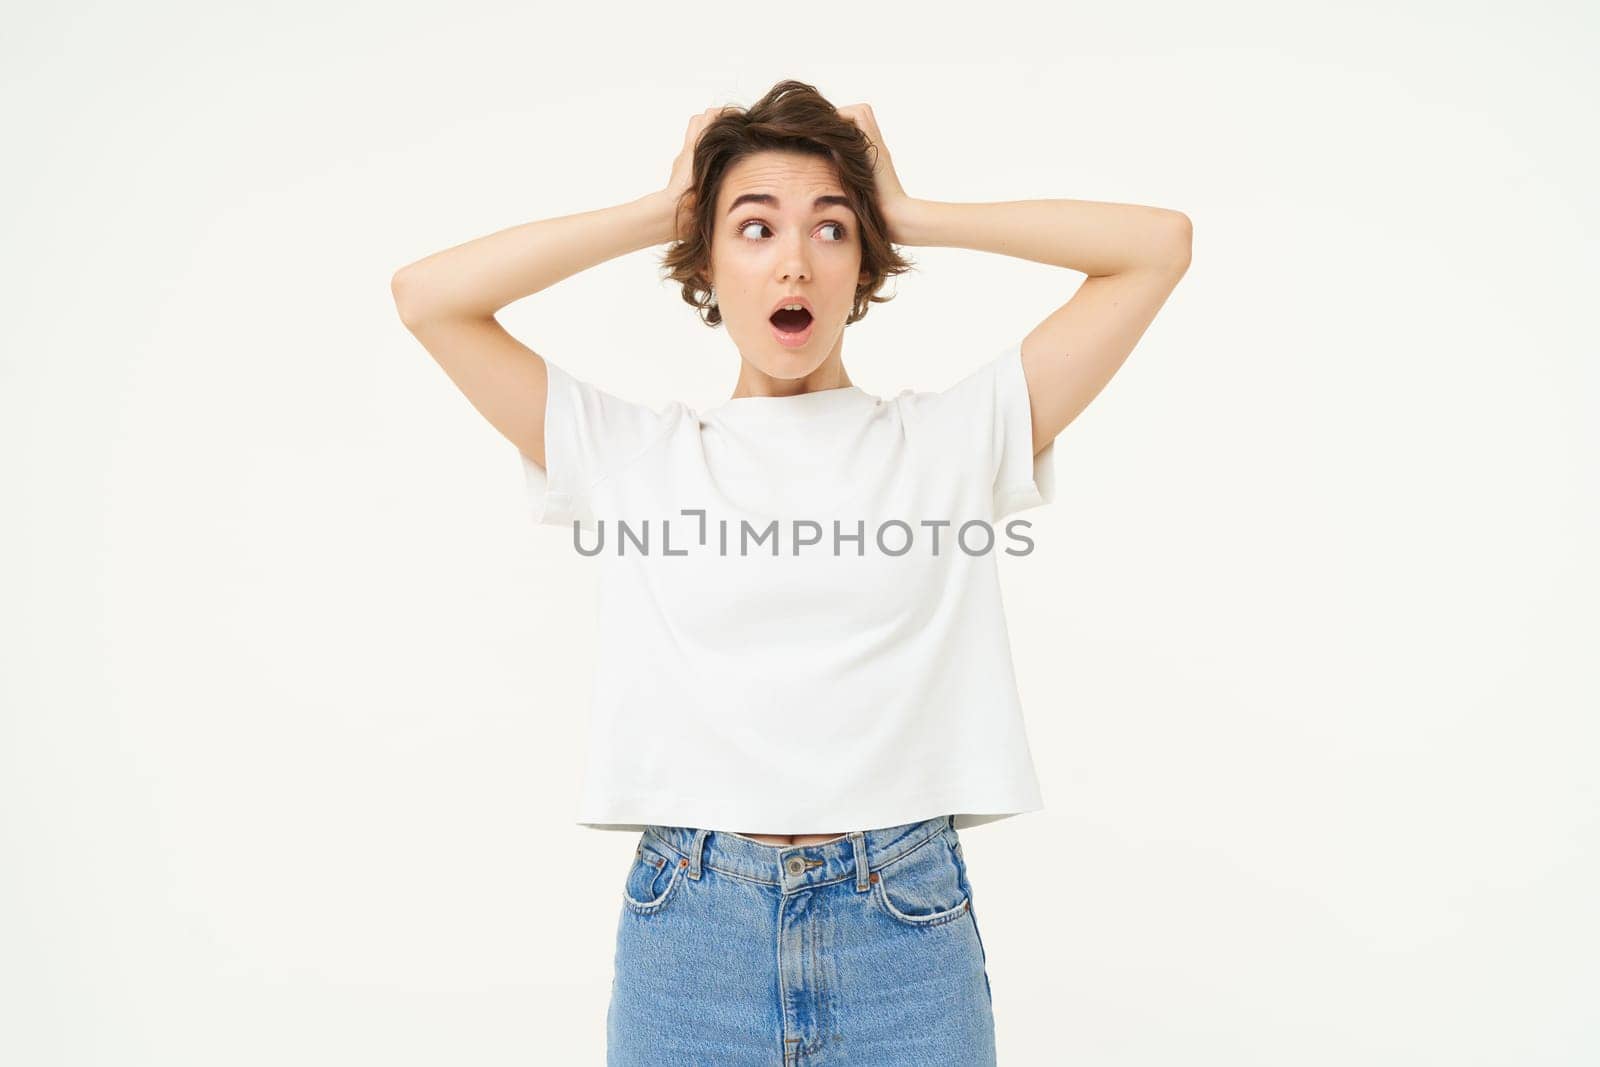 Portrait of girl in panic, grabs her head with both hands, looking shocked, worried about something, standing over white background.